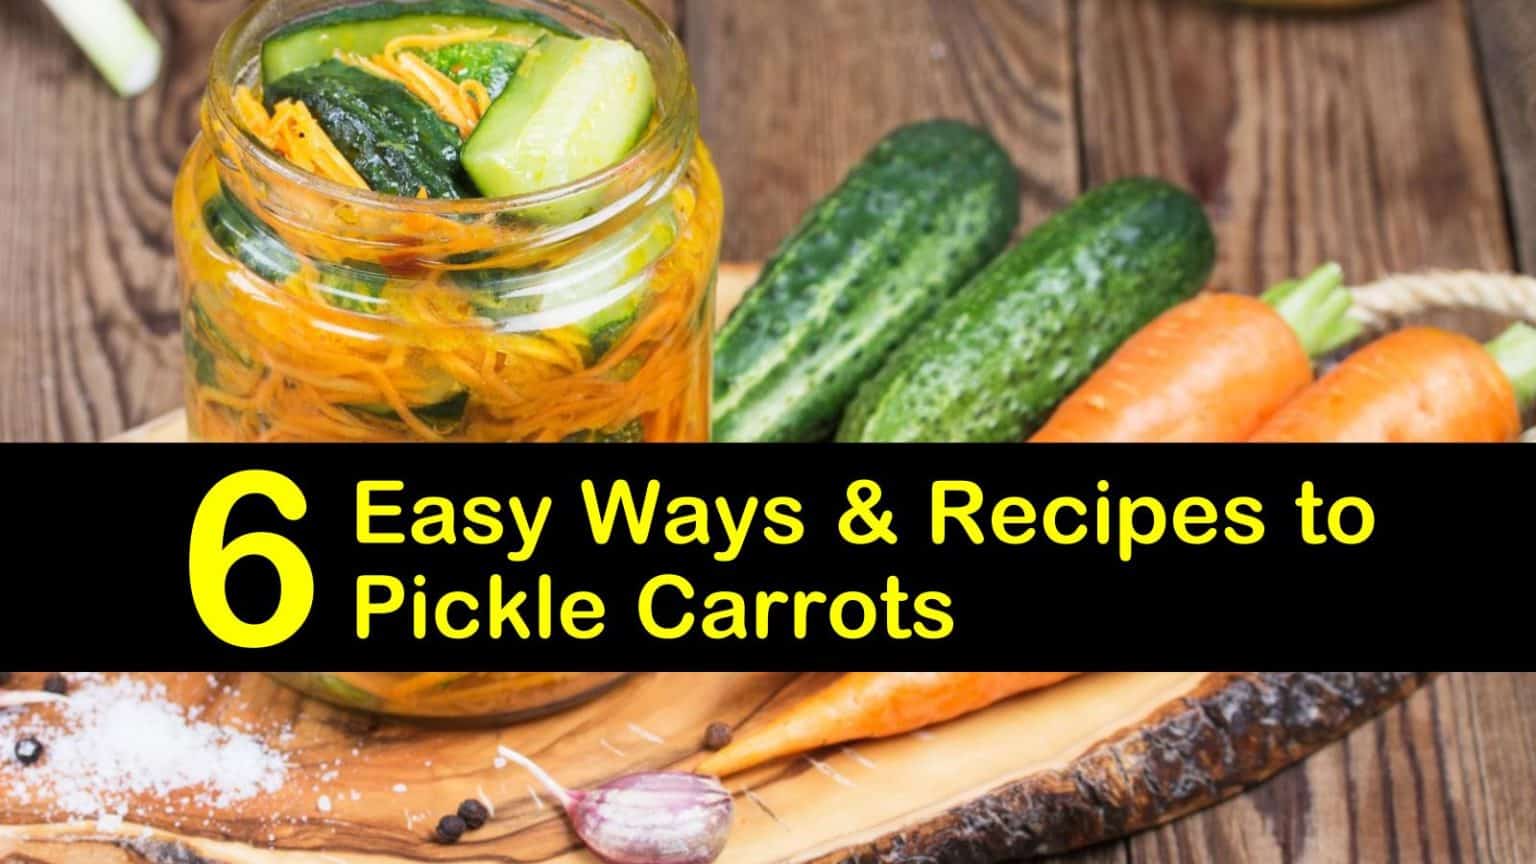 6 Easy Ways & Recipes to Pickle Carrots